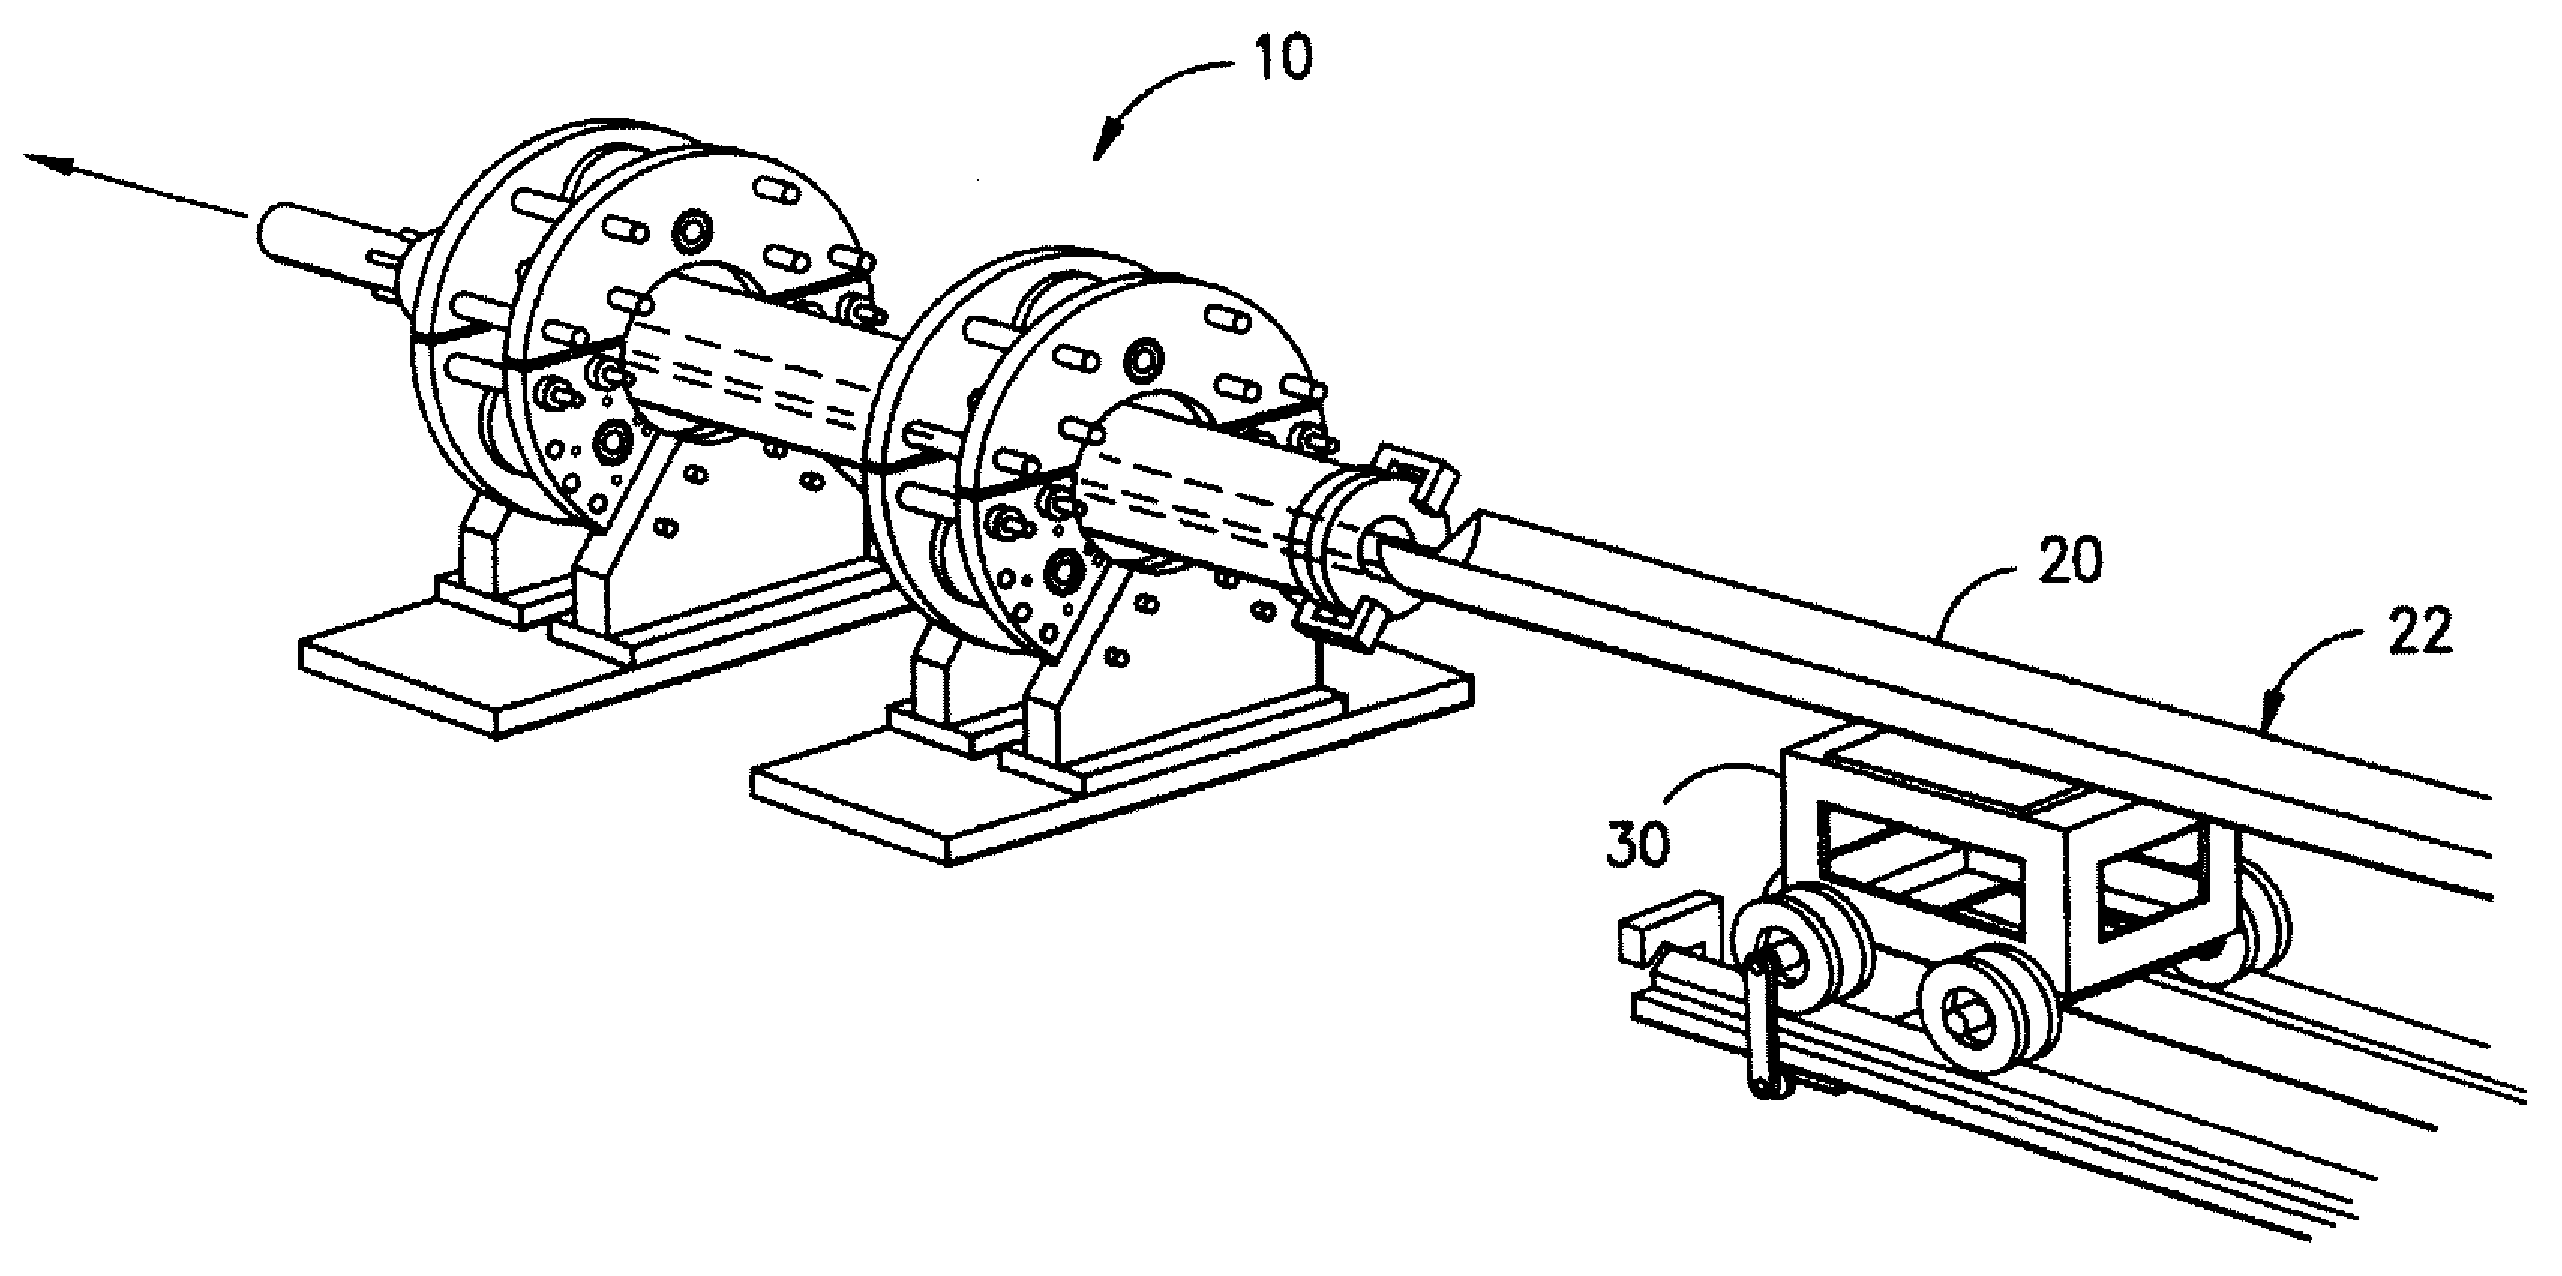 Method of making precursor hollow castings for tube manufacture